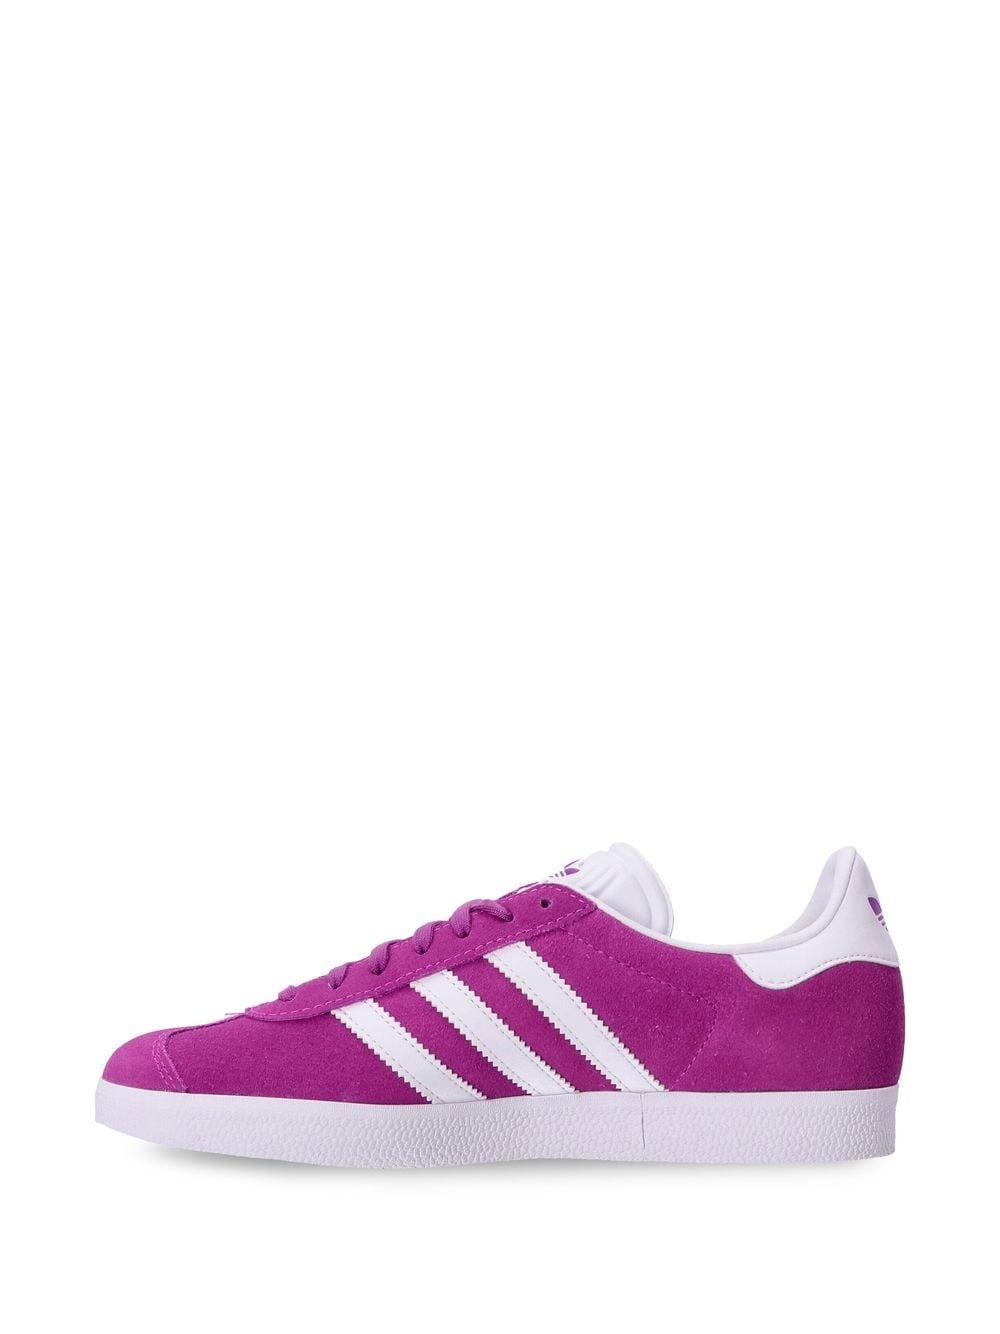 Adidas Originals Gazelle Lace-up Sneakers In Purple | ModeSens